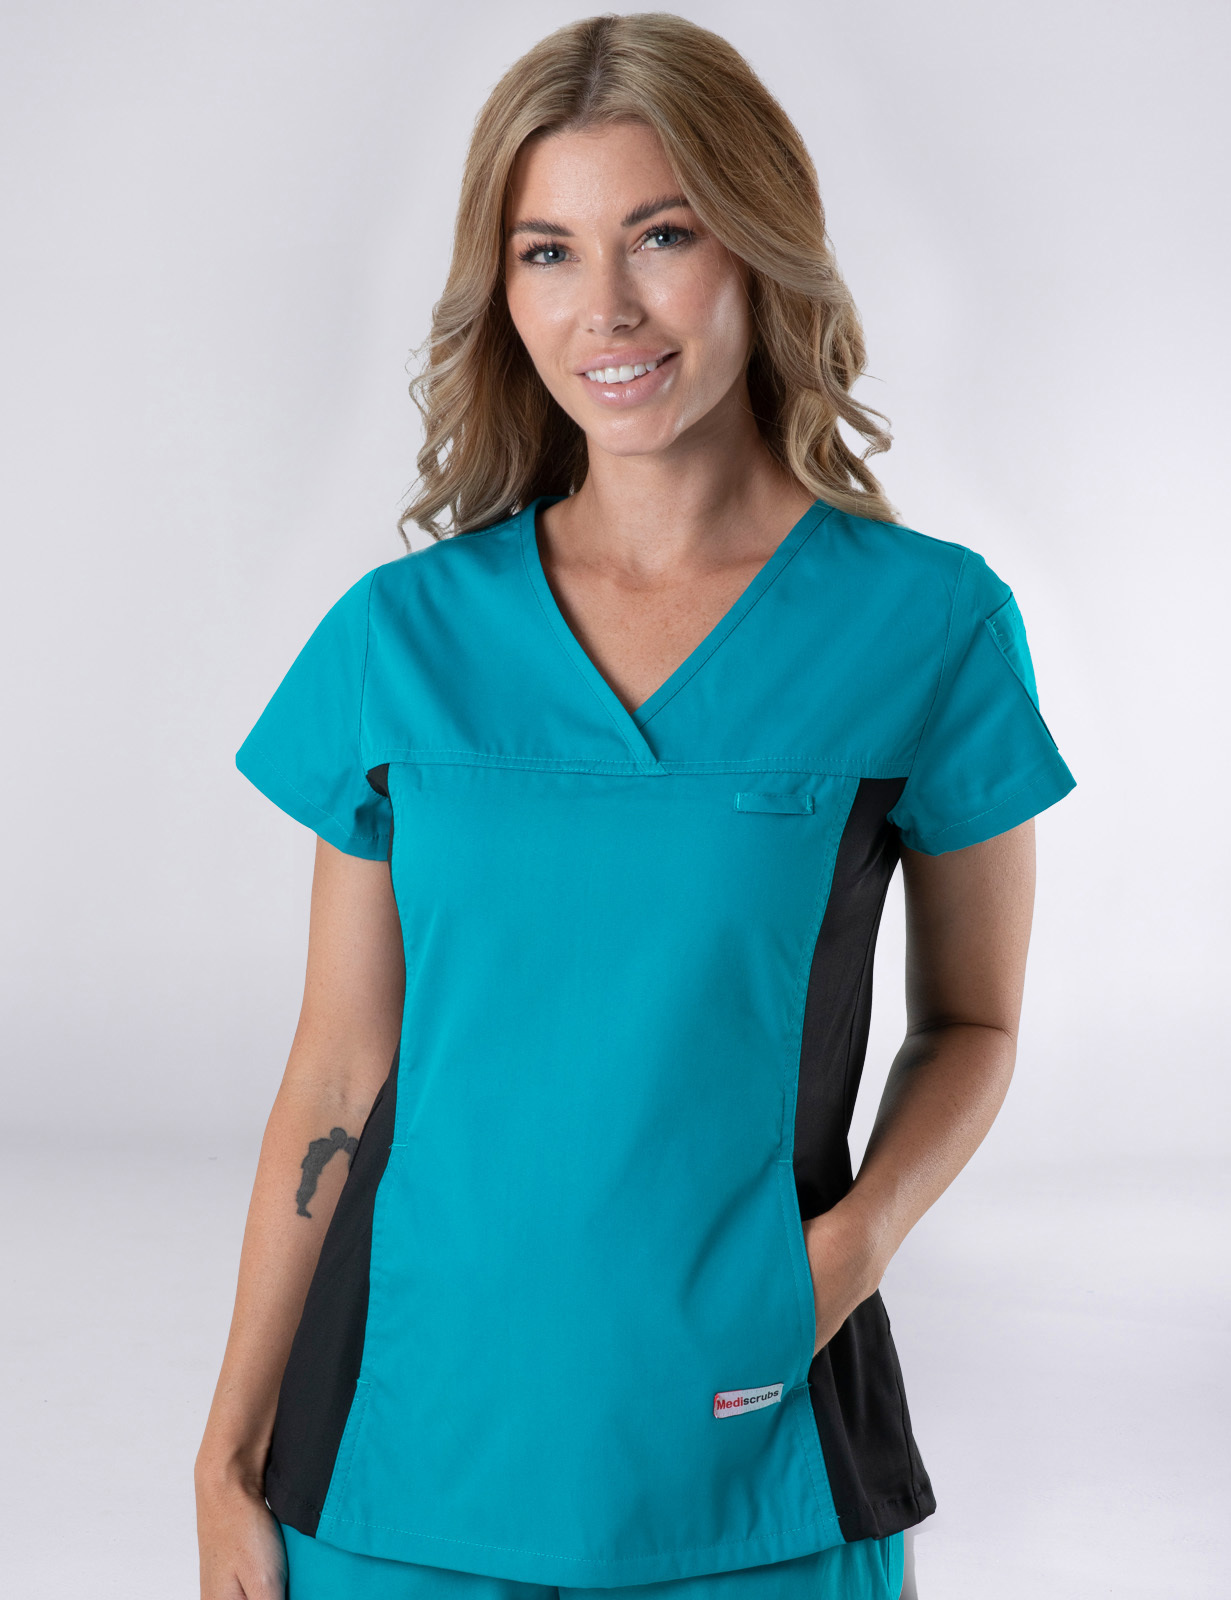 Women's Fit Solid Scrub Top With Spandex Panel